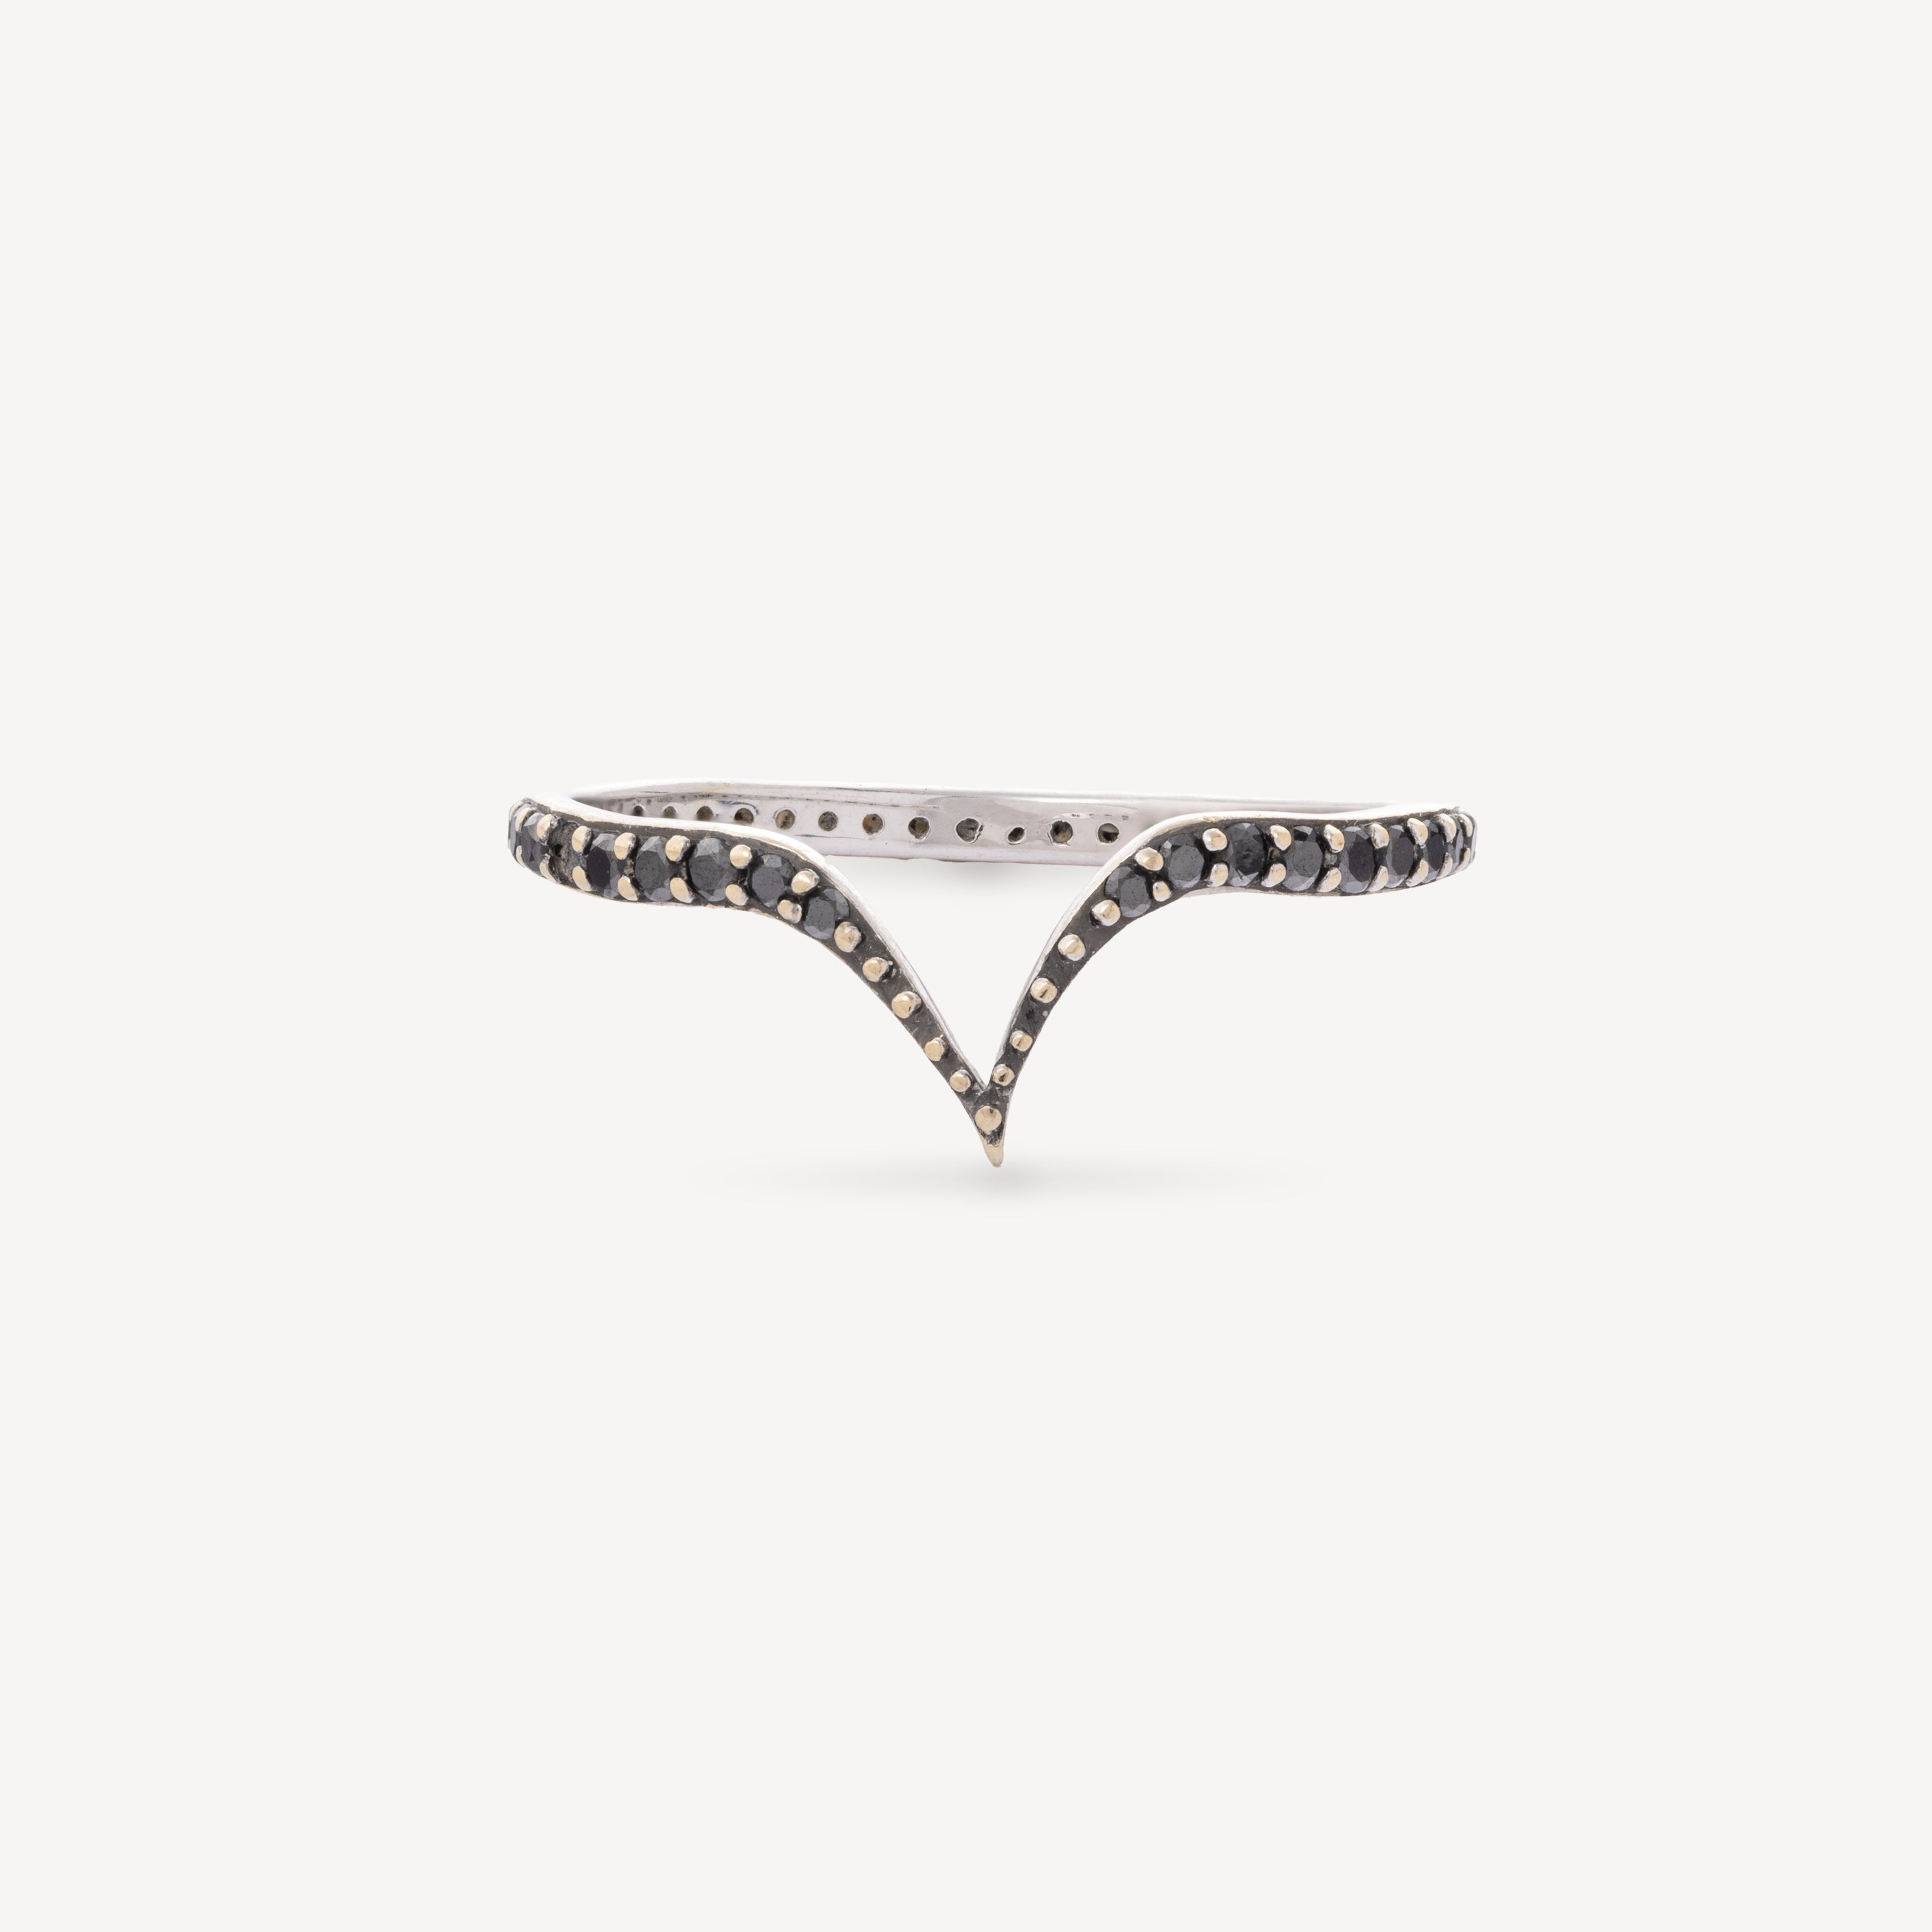 Fabri Ring in White Gold with Black Diamond